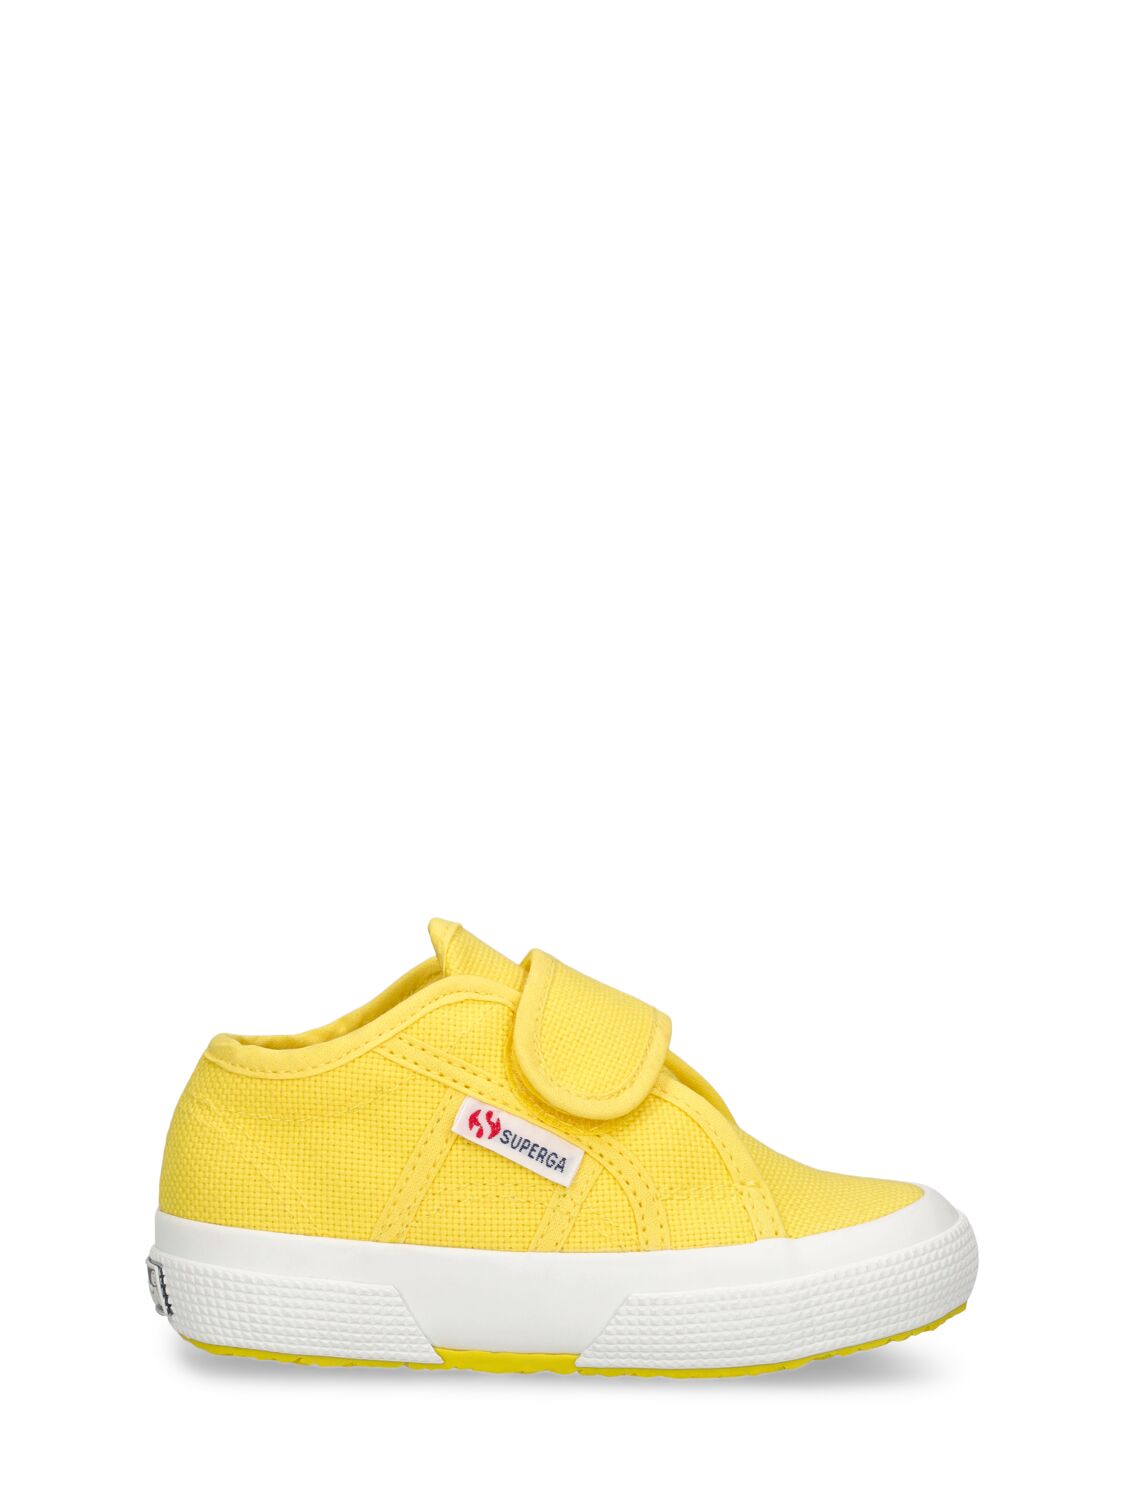 Superga Kids' 2750-bstrap Cotton Canvas Sneakers In Yellow